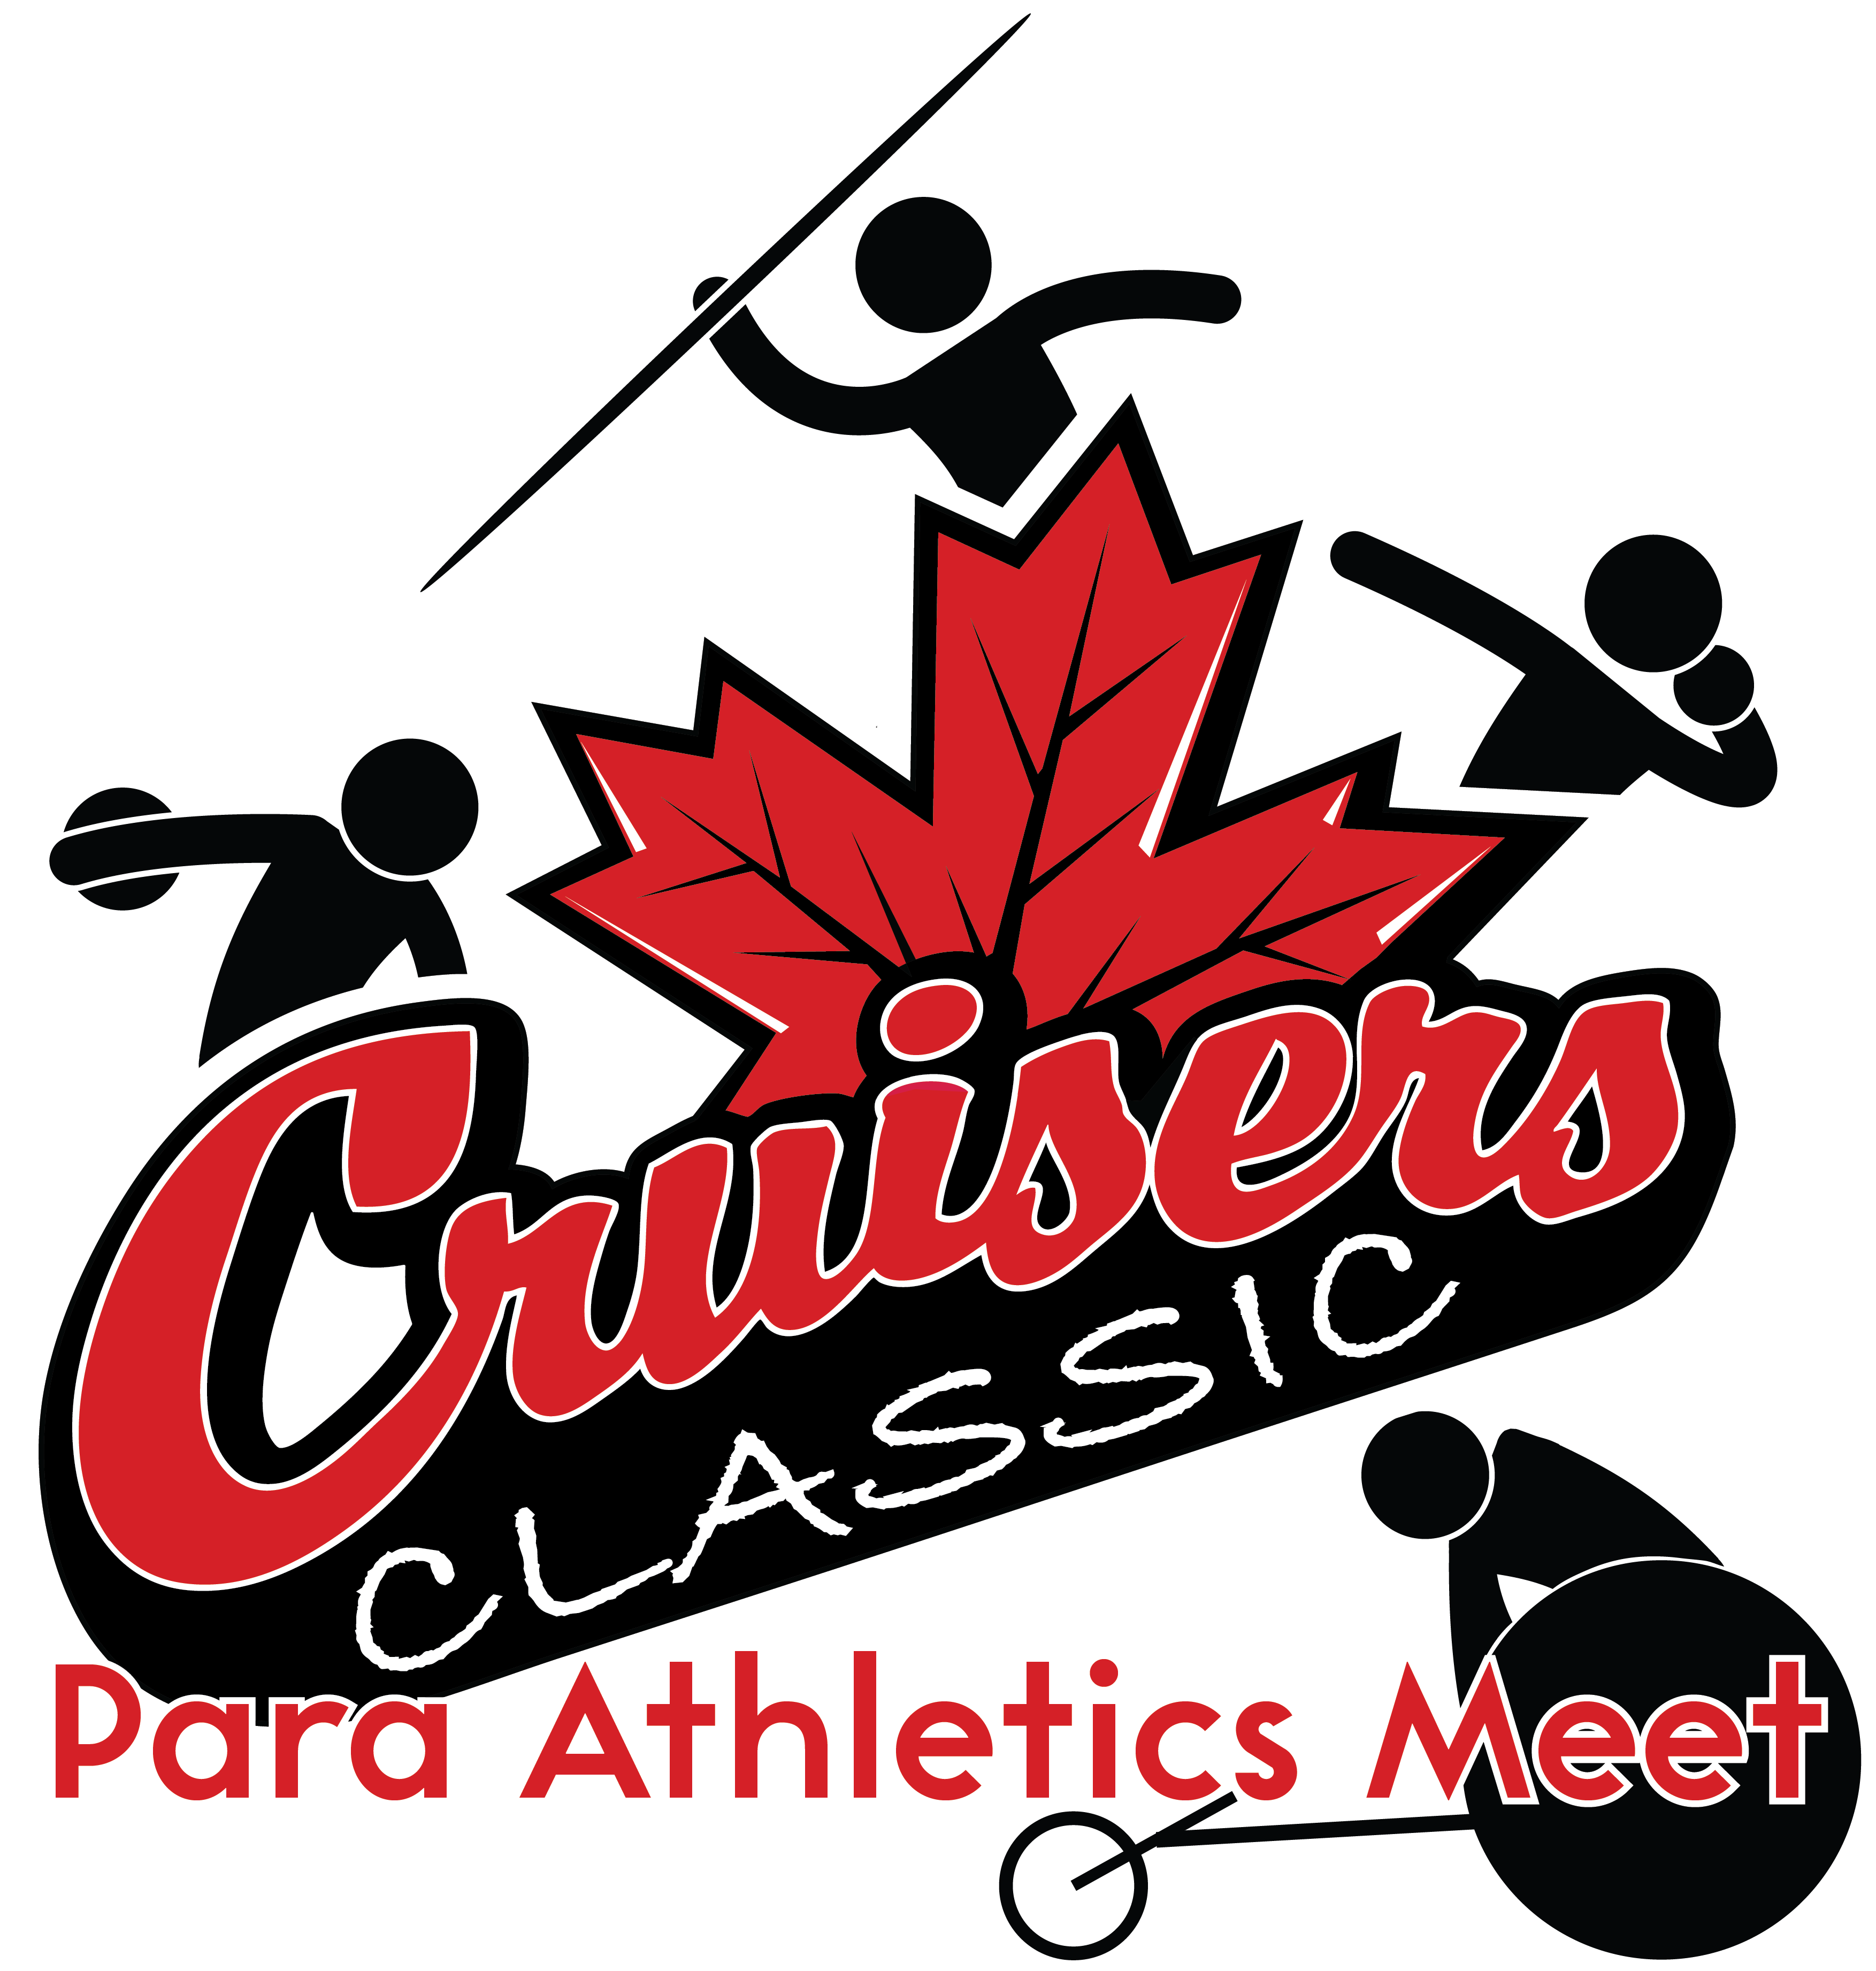 Cruisers Classic #1 - Coaches, Volunteers, Assistants, Officials